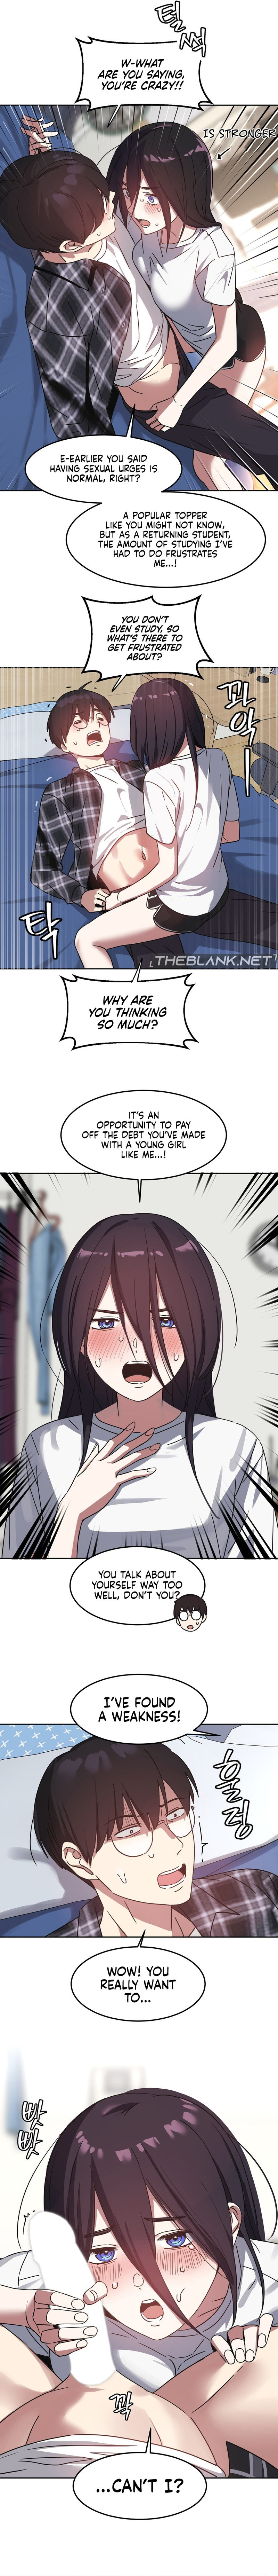 The Iron-Wall Beauty of My Department is a Masochist?! - Chapter 3 Page 7